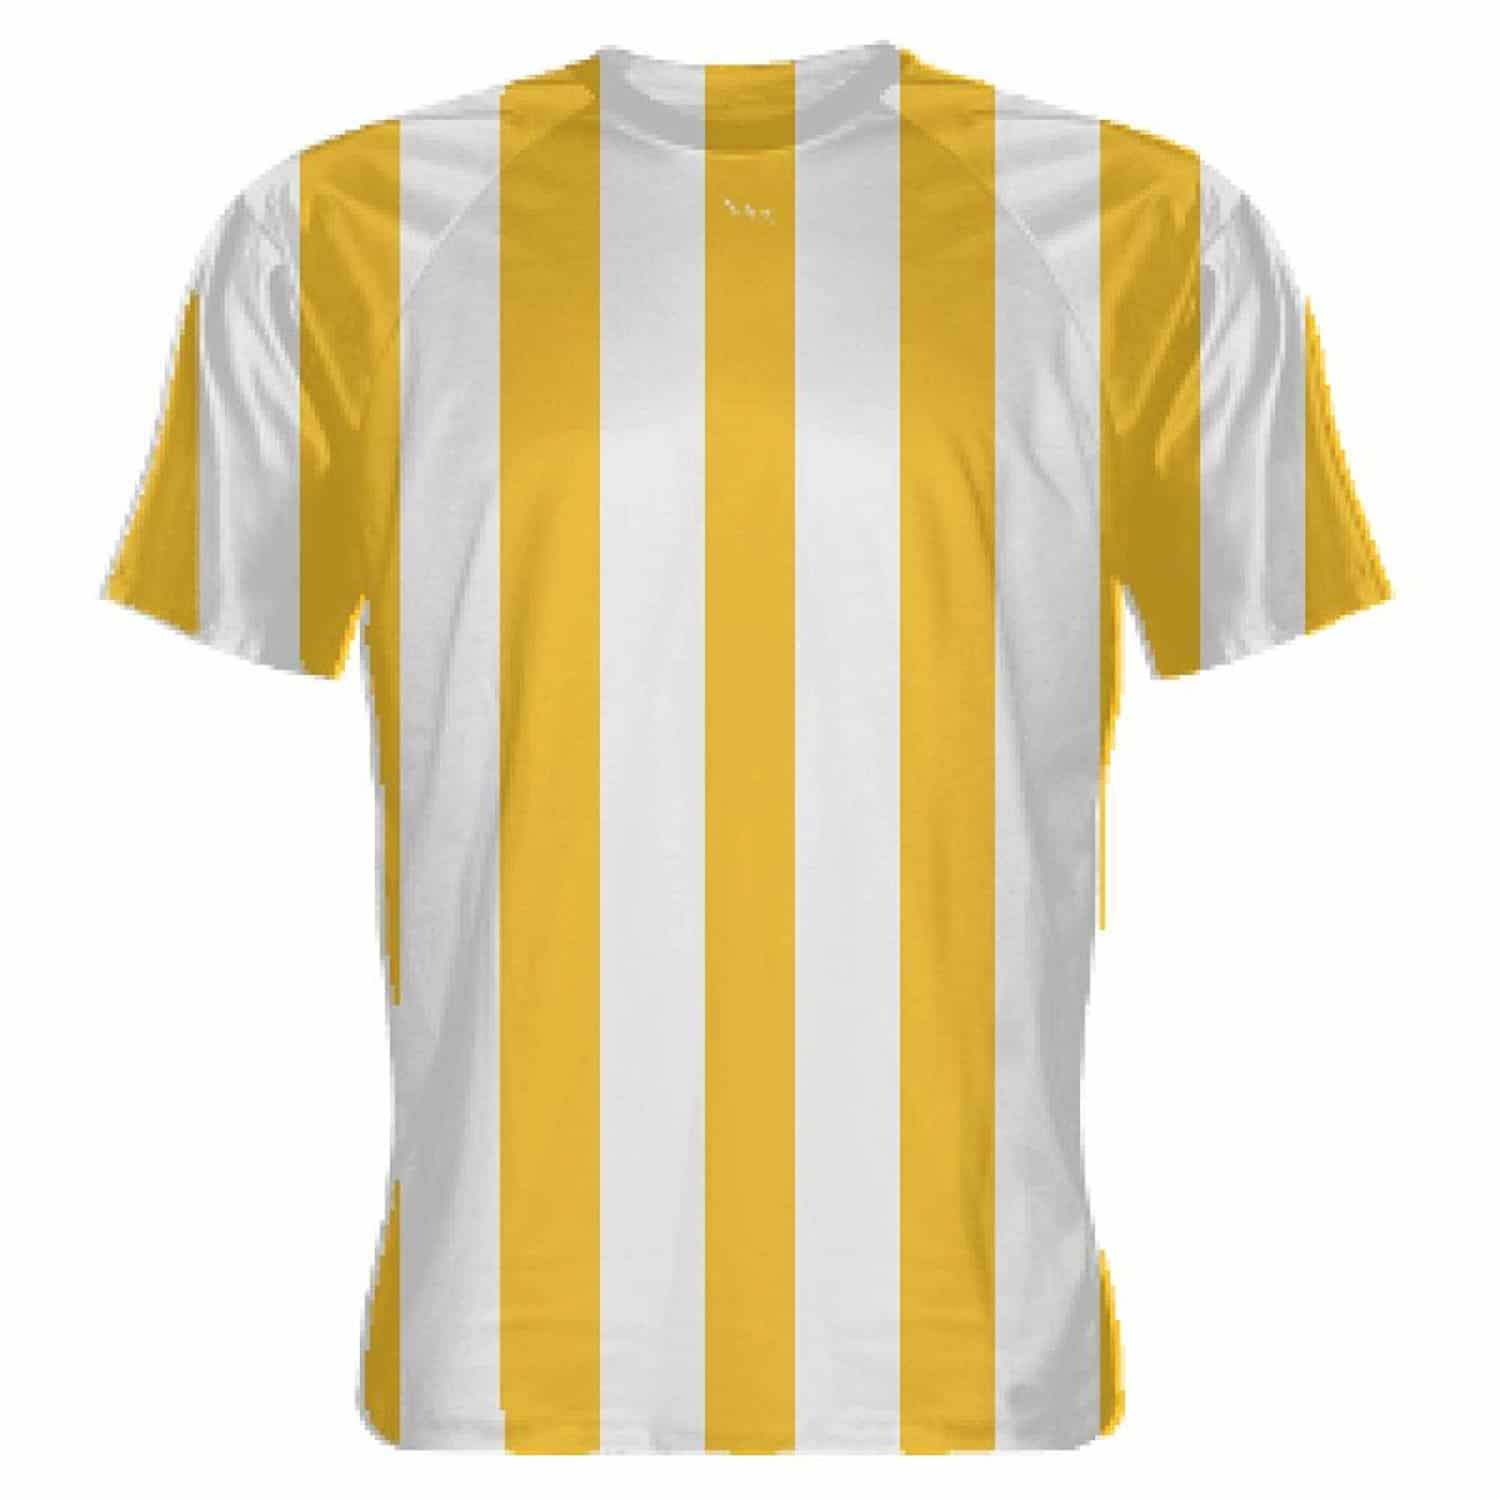 Gold and Striped Soccer Jerseys - Youth Shirts - Adult Soccer Shirts – Lightning Wear Apparel | Maryland | USA